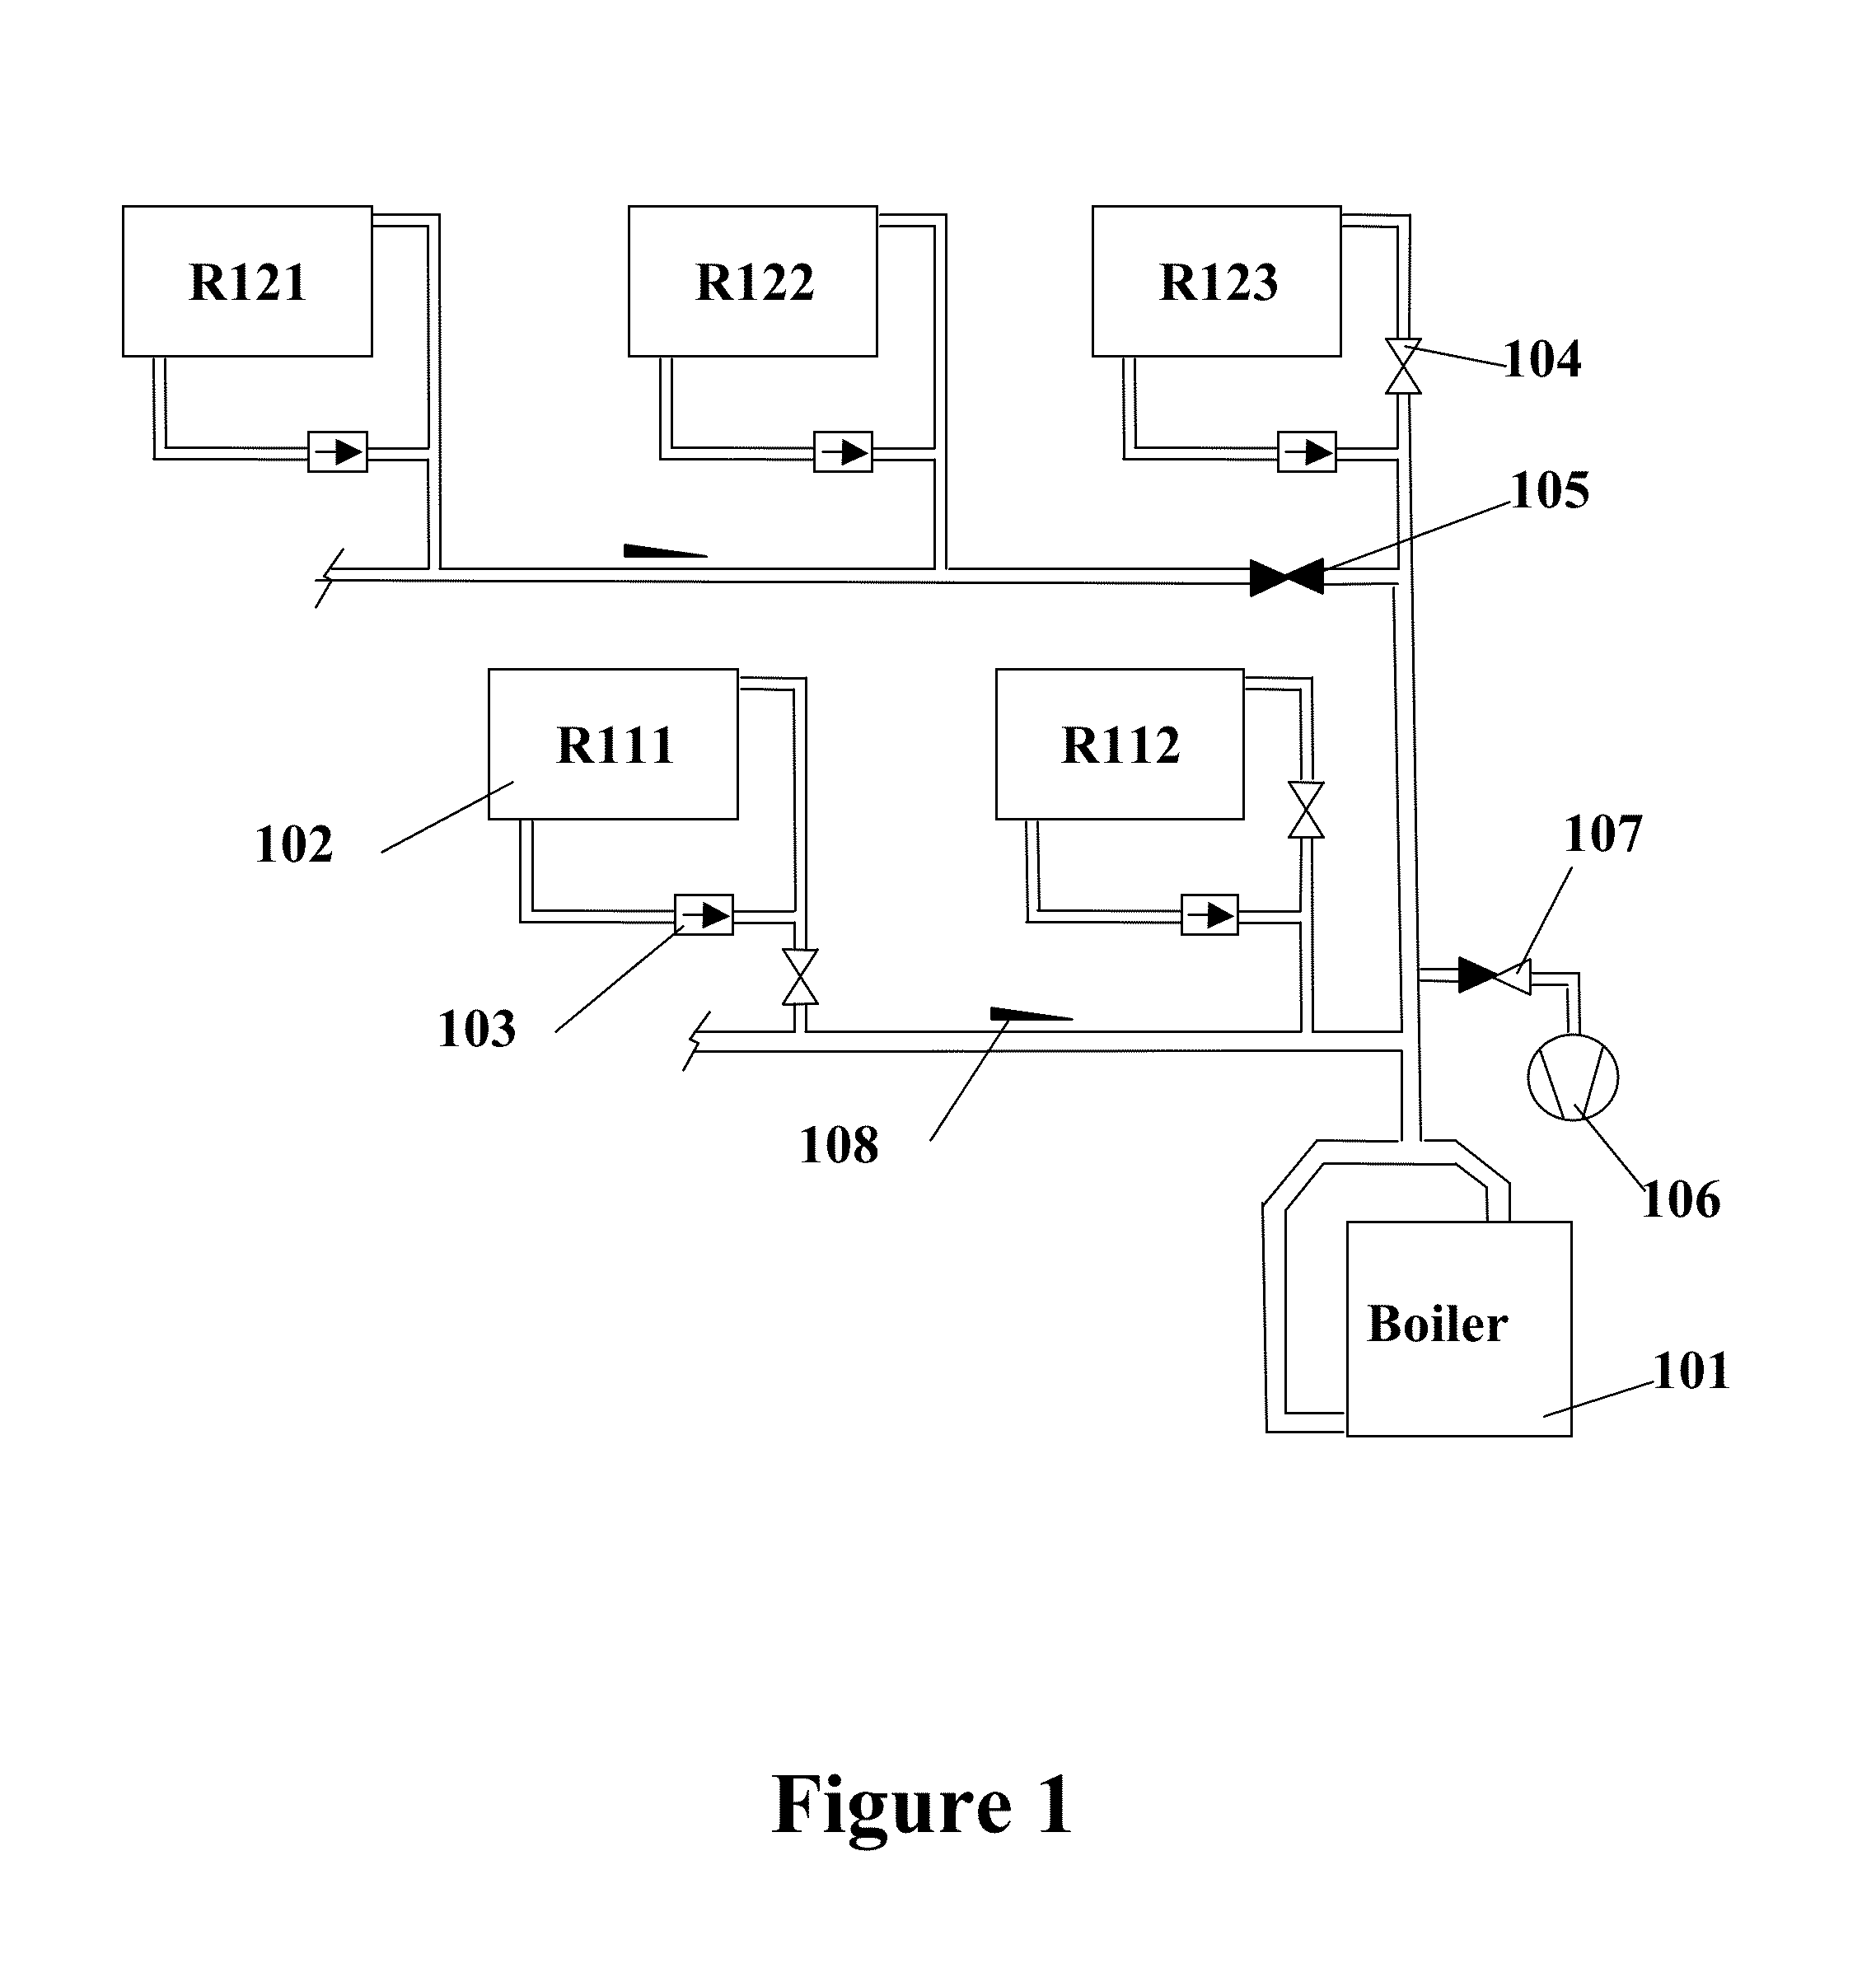 Vapor vacuum heating systems and integration with condensing vacuum boilers